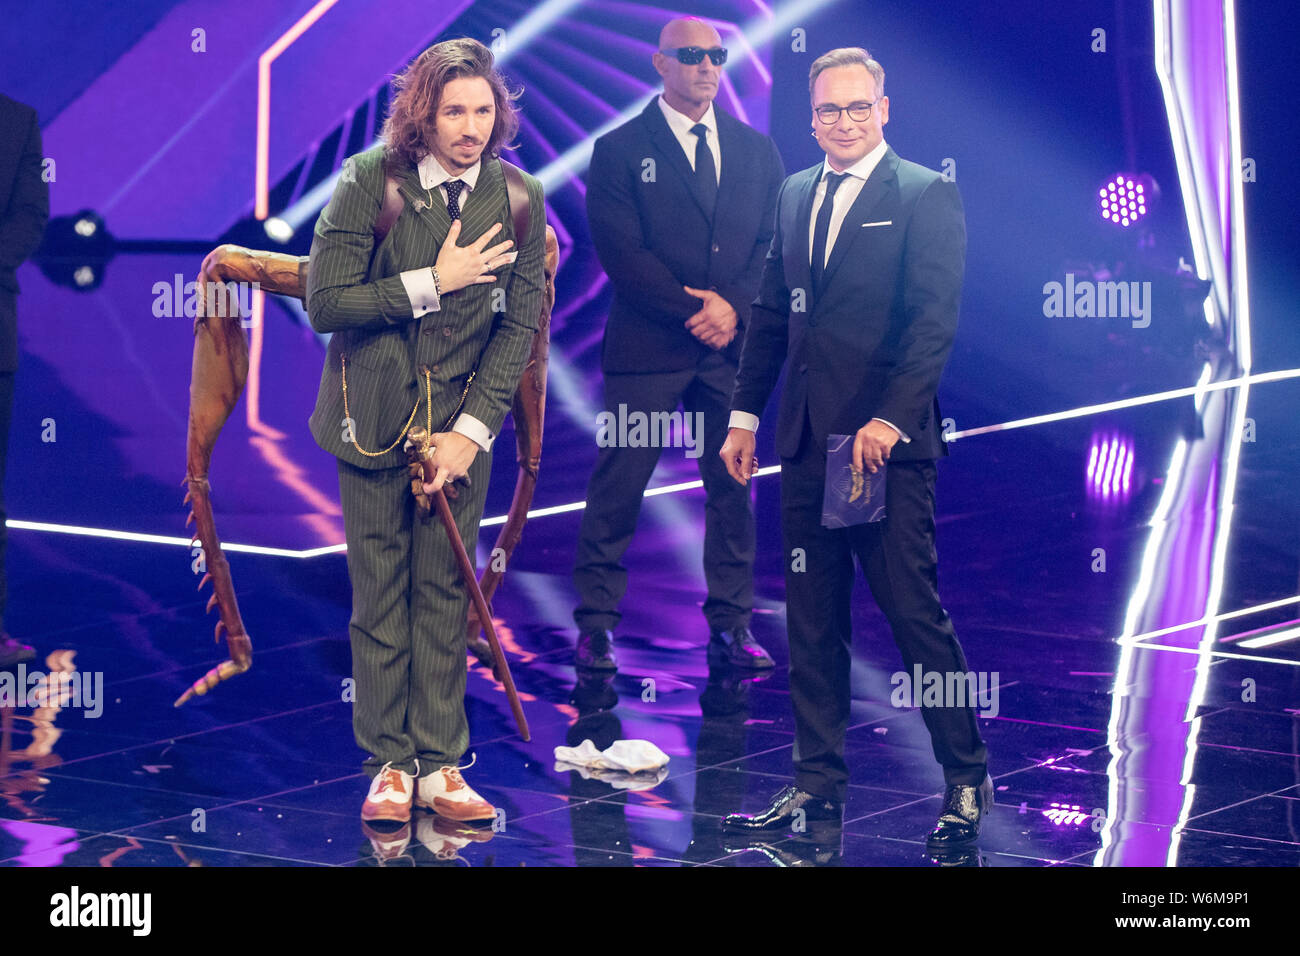 Cologne, Germany. 02nd Aug, 2019. Musician Gil Ofarim (l) stands on stage as 'grasshopper' at the ProSieben show 'The Masked Singer' next to presenter Matthias Opdenhövel (r). Credit: Marcel Kusch/dpa/Alamy Live News Stock Photo